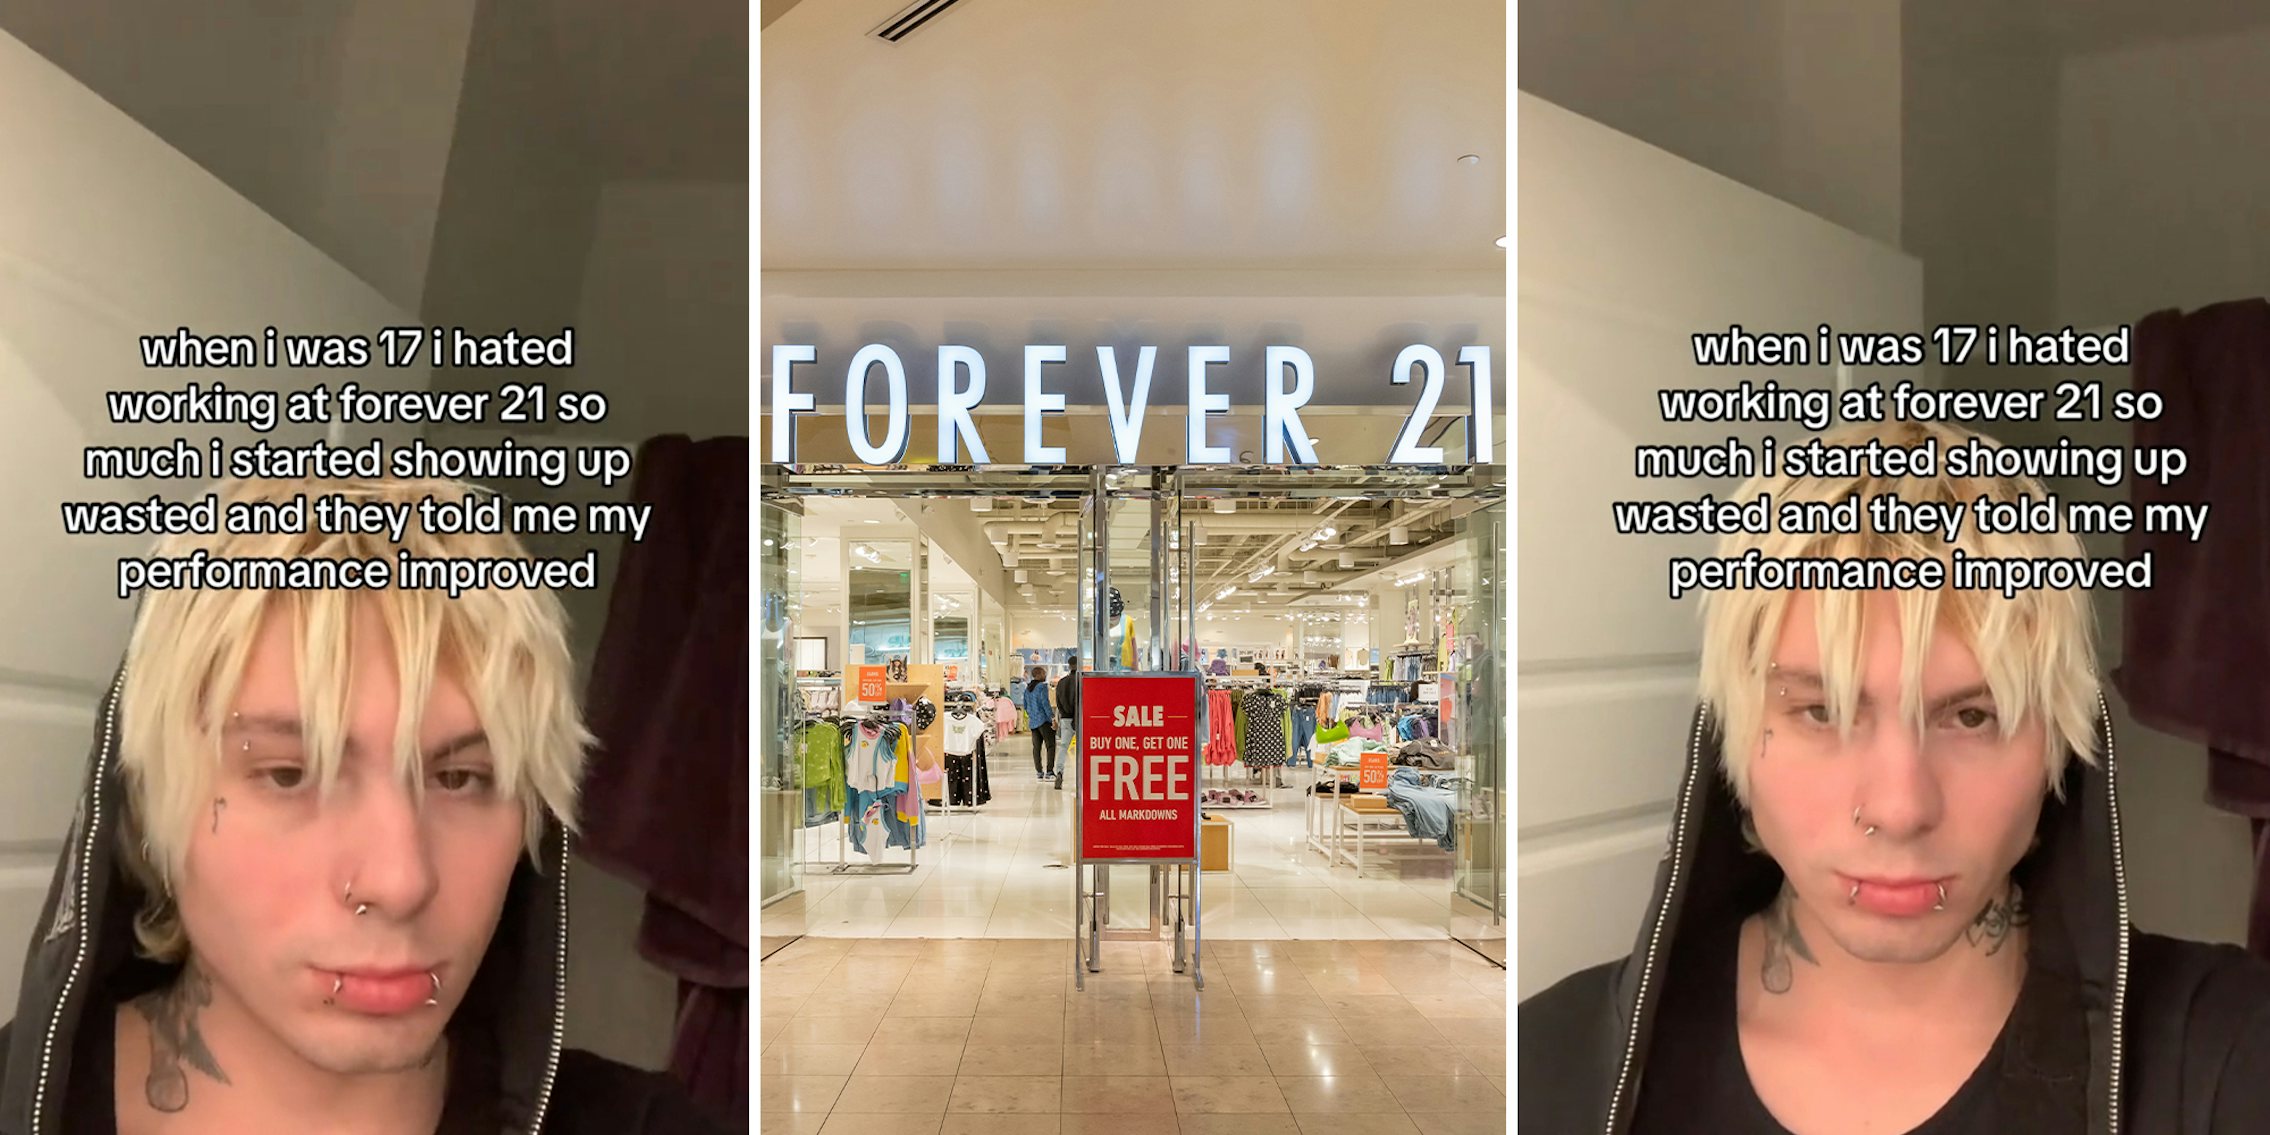 Ex Forever 21 worker says his performance improved inebriated